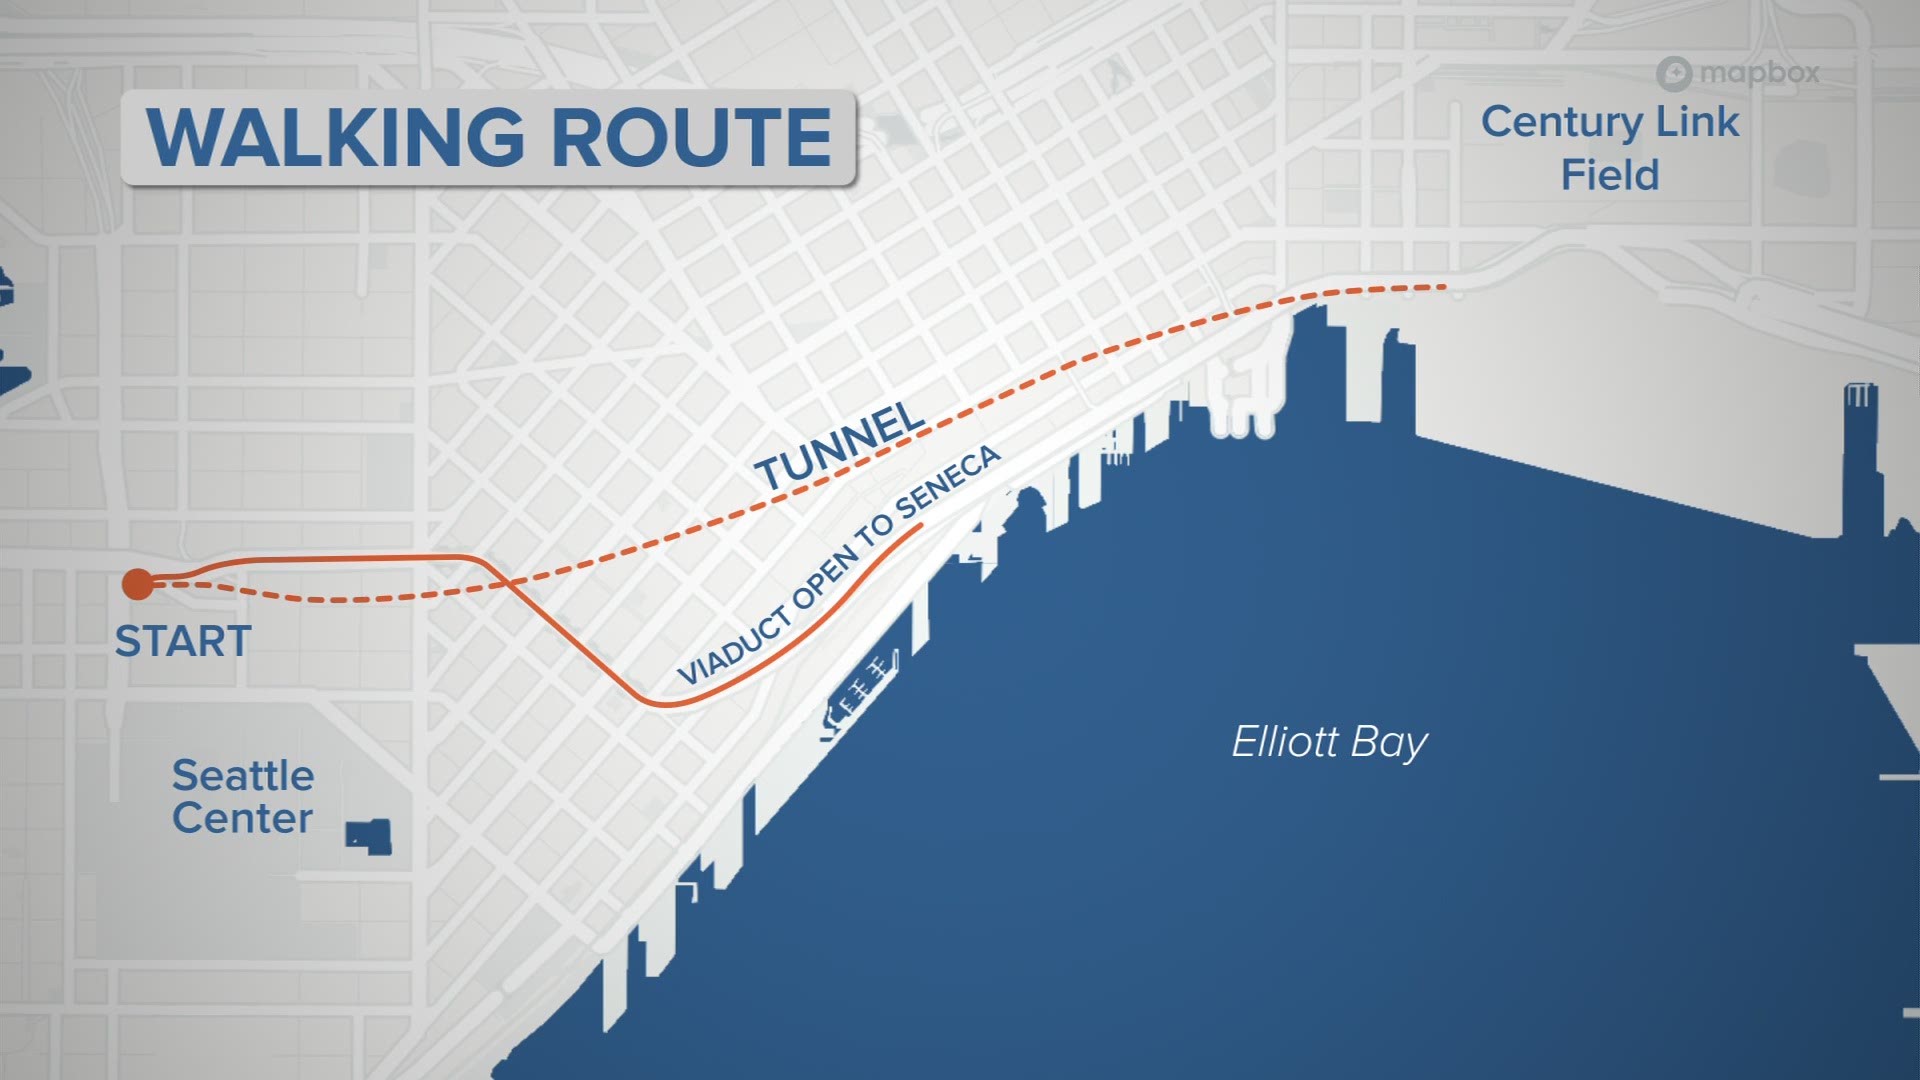 A walk, fun run, and bike ride through Seattle's new SR 99 tunnel will follow these routes during a grand opening celebration.